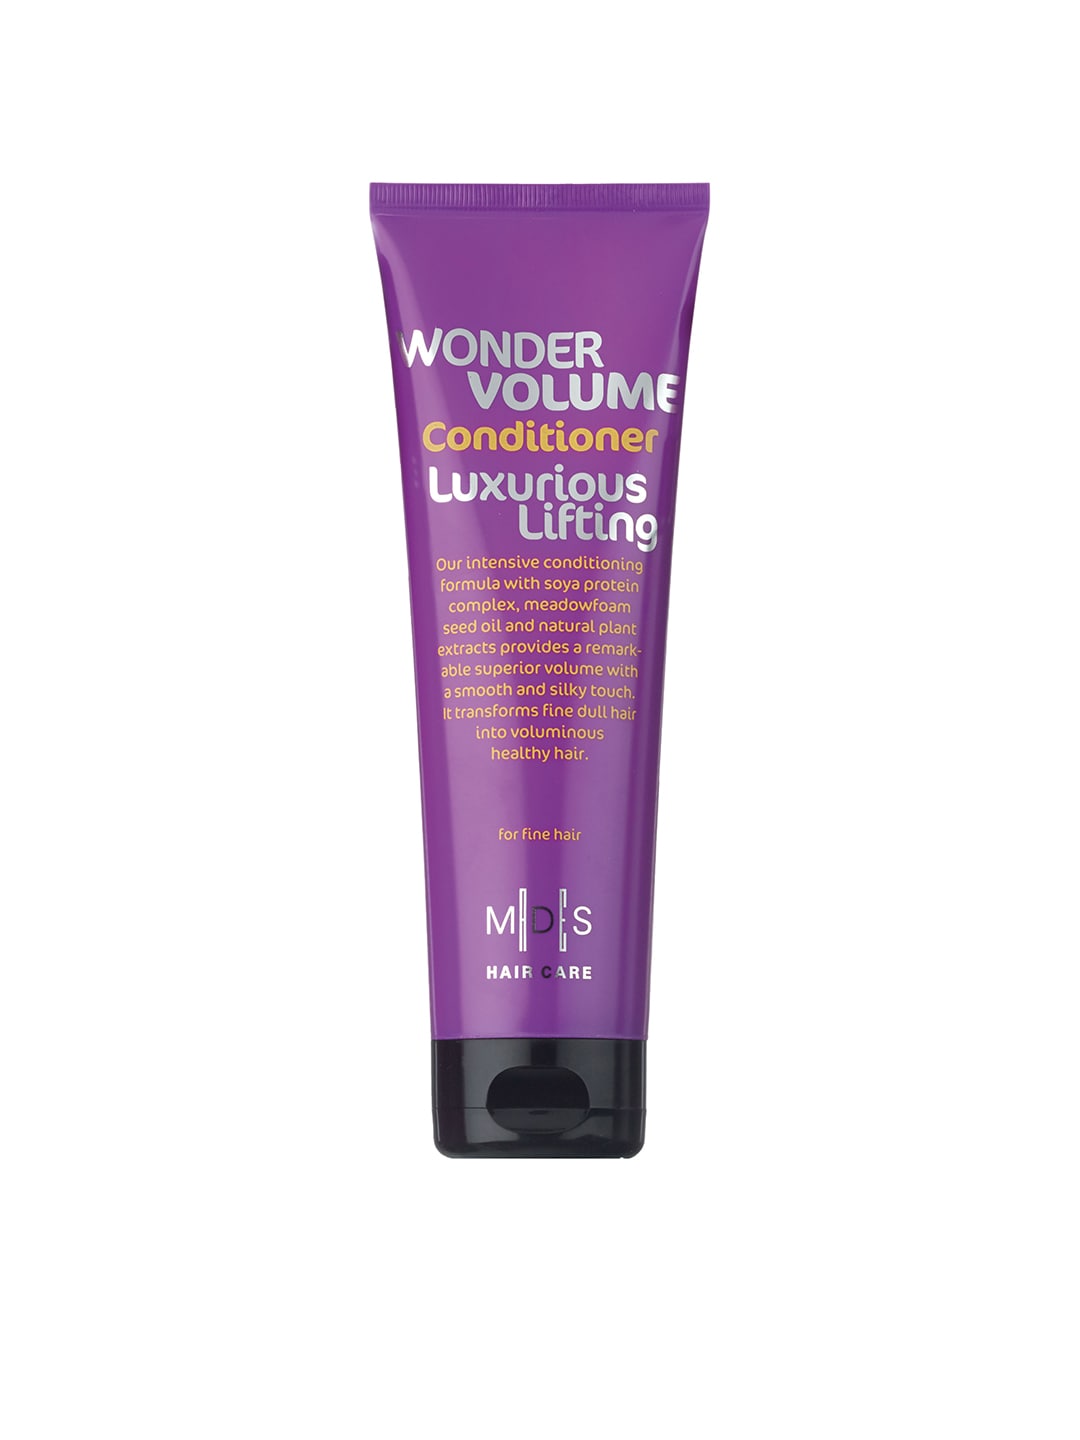 Mades Unisex Wonder Volume Luxurious Lifting Hair Conditioner 250 ml Price in India